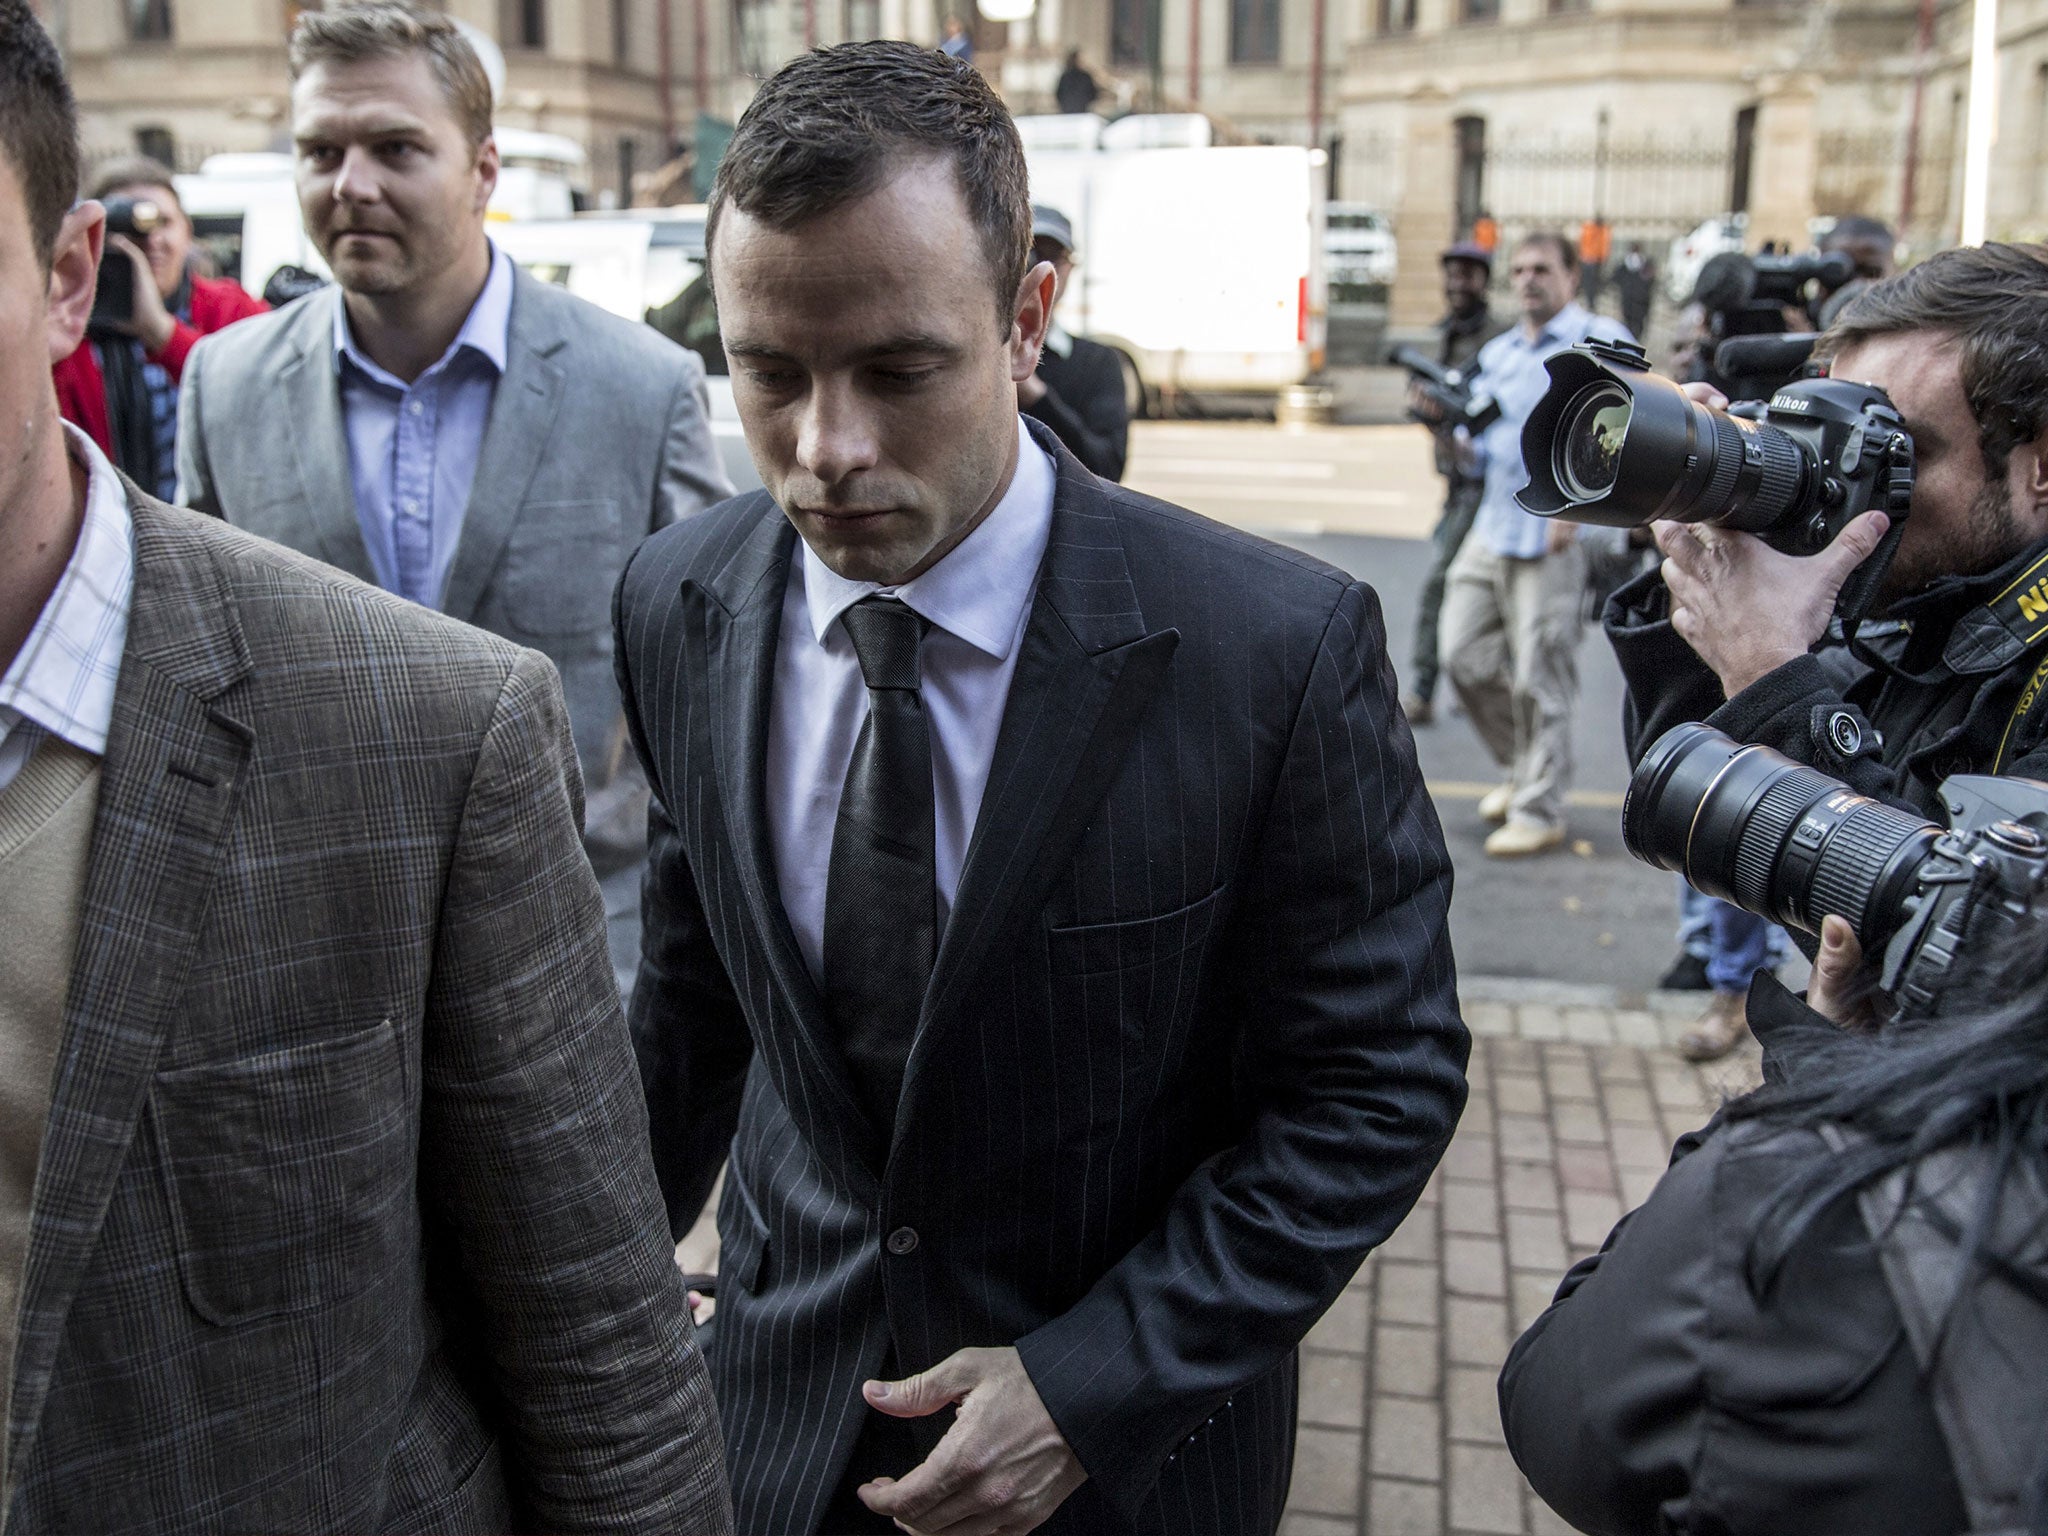 South African Paralympian Oscar Pistorius (C) arrives in Court in Pretoria on June 30, 2014. After a six-week break, the murder trial that has gripped South Africa and the world resumes on June 30 when Paralympian Oscar Pistorius returns to the dock after